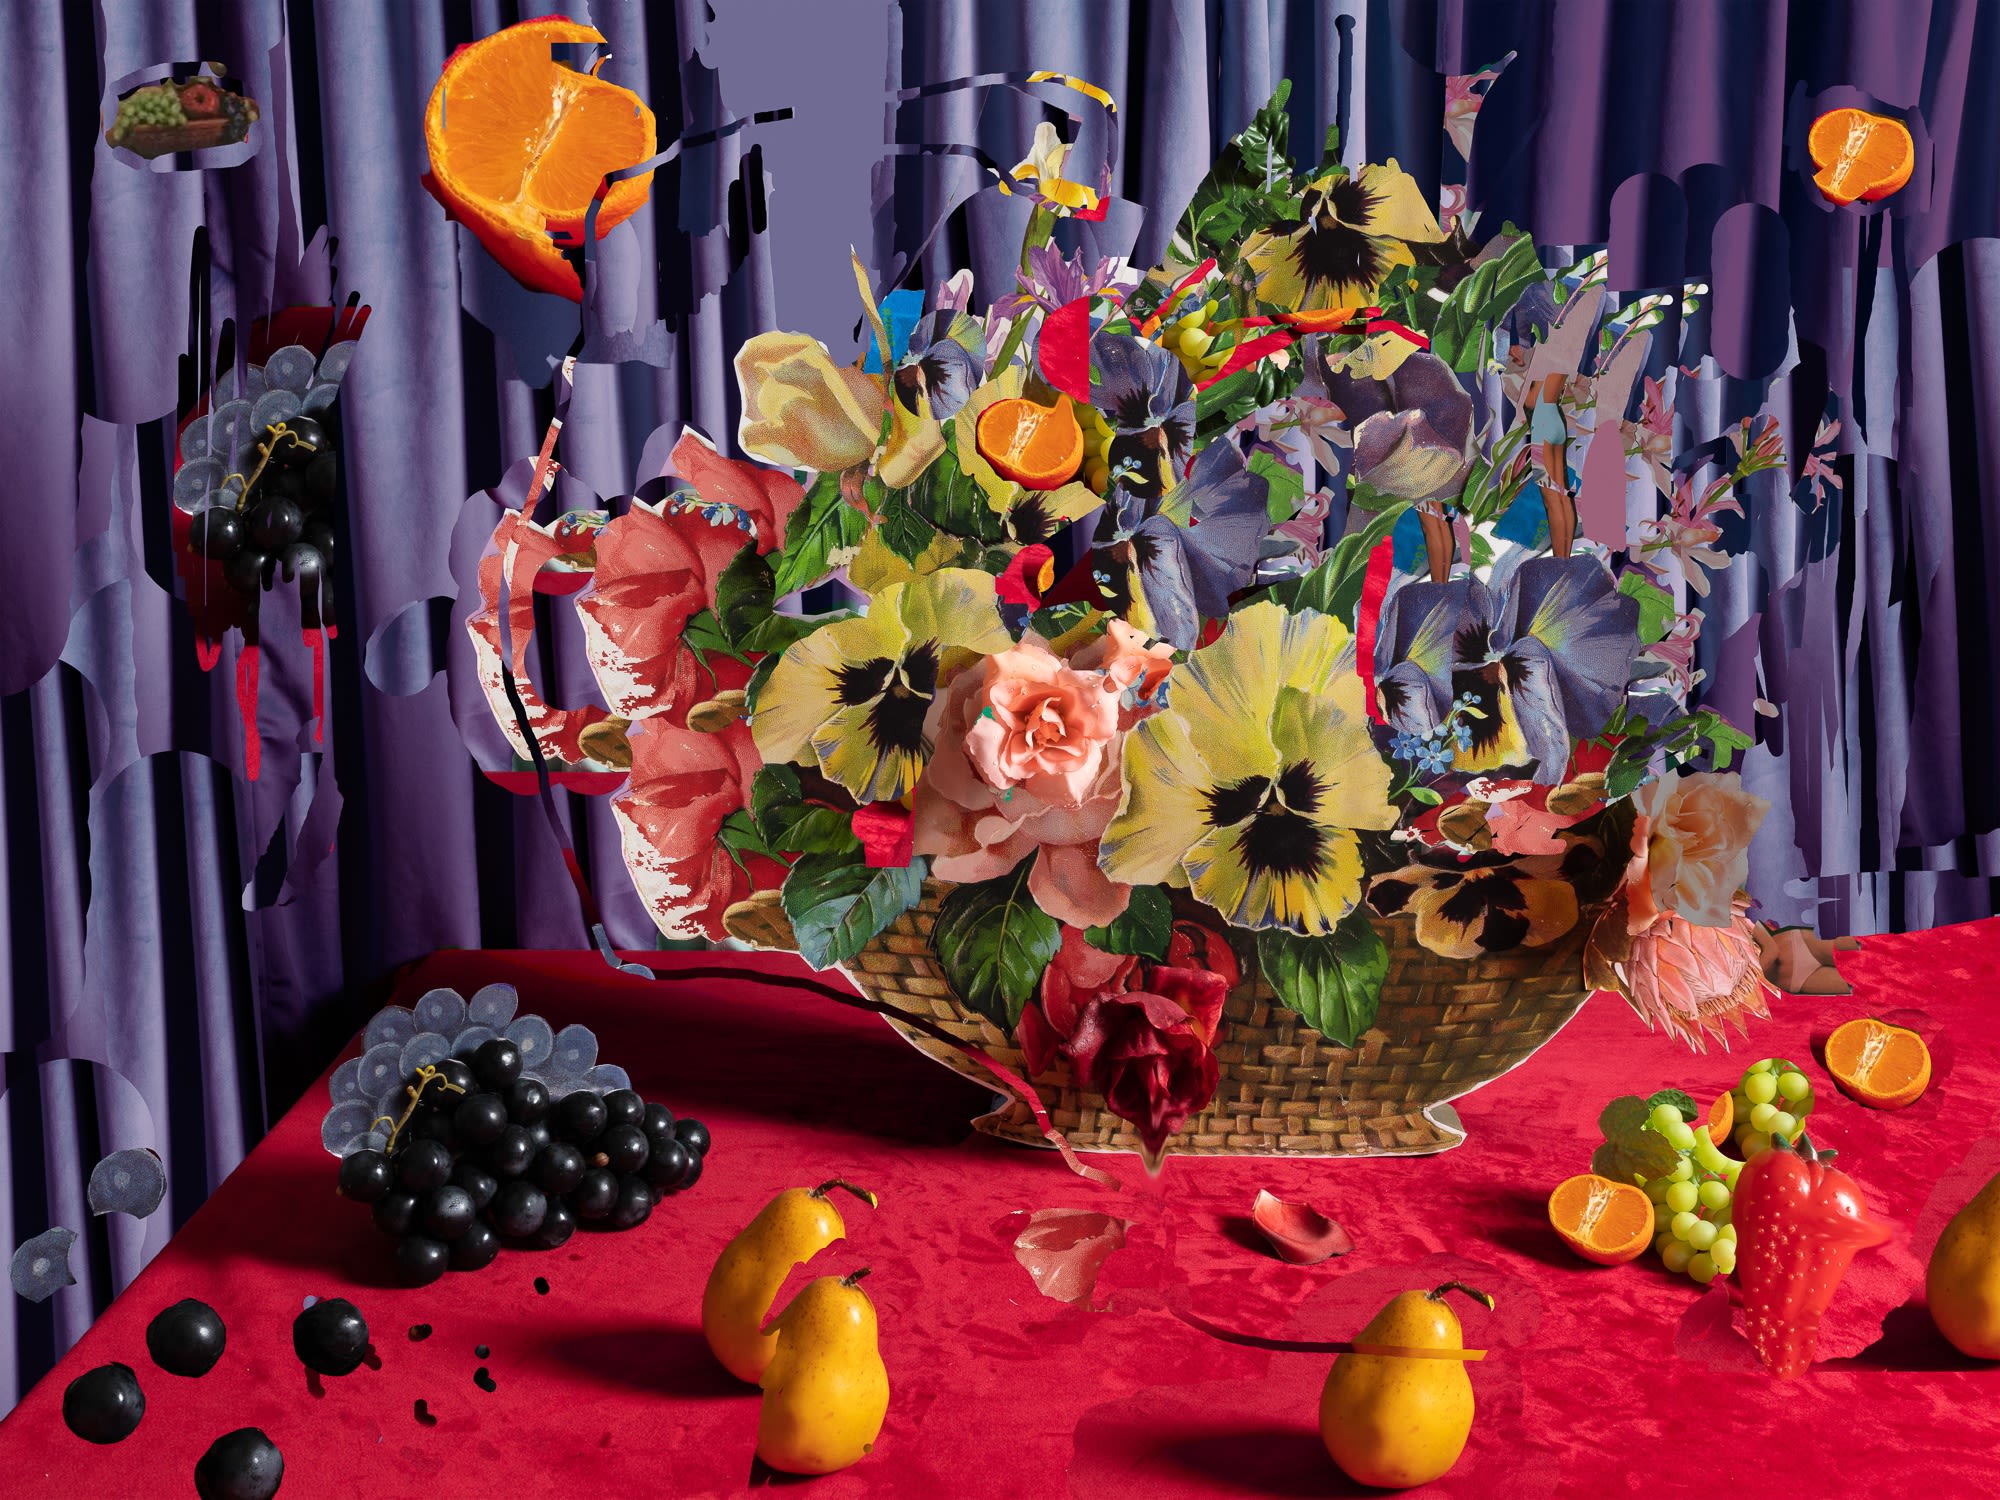 “Fruit of the Loom/Womb” (2020) from the series Dining Room Pictures by Kelda Van Patten